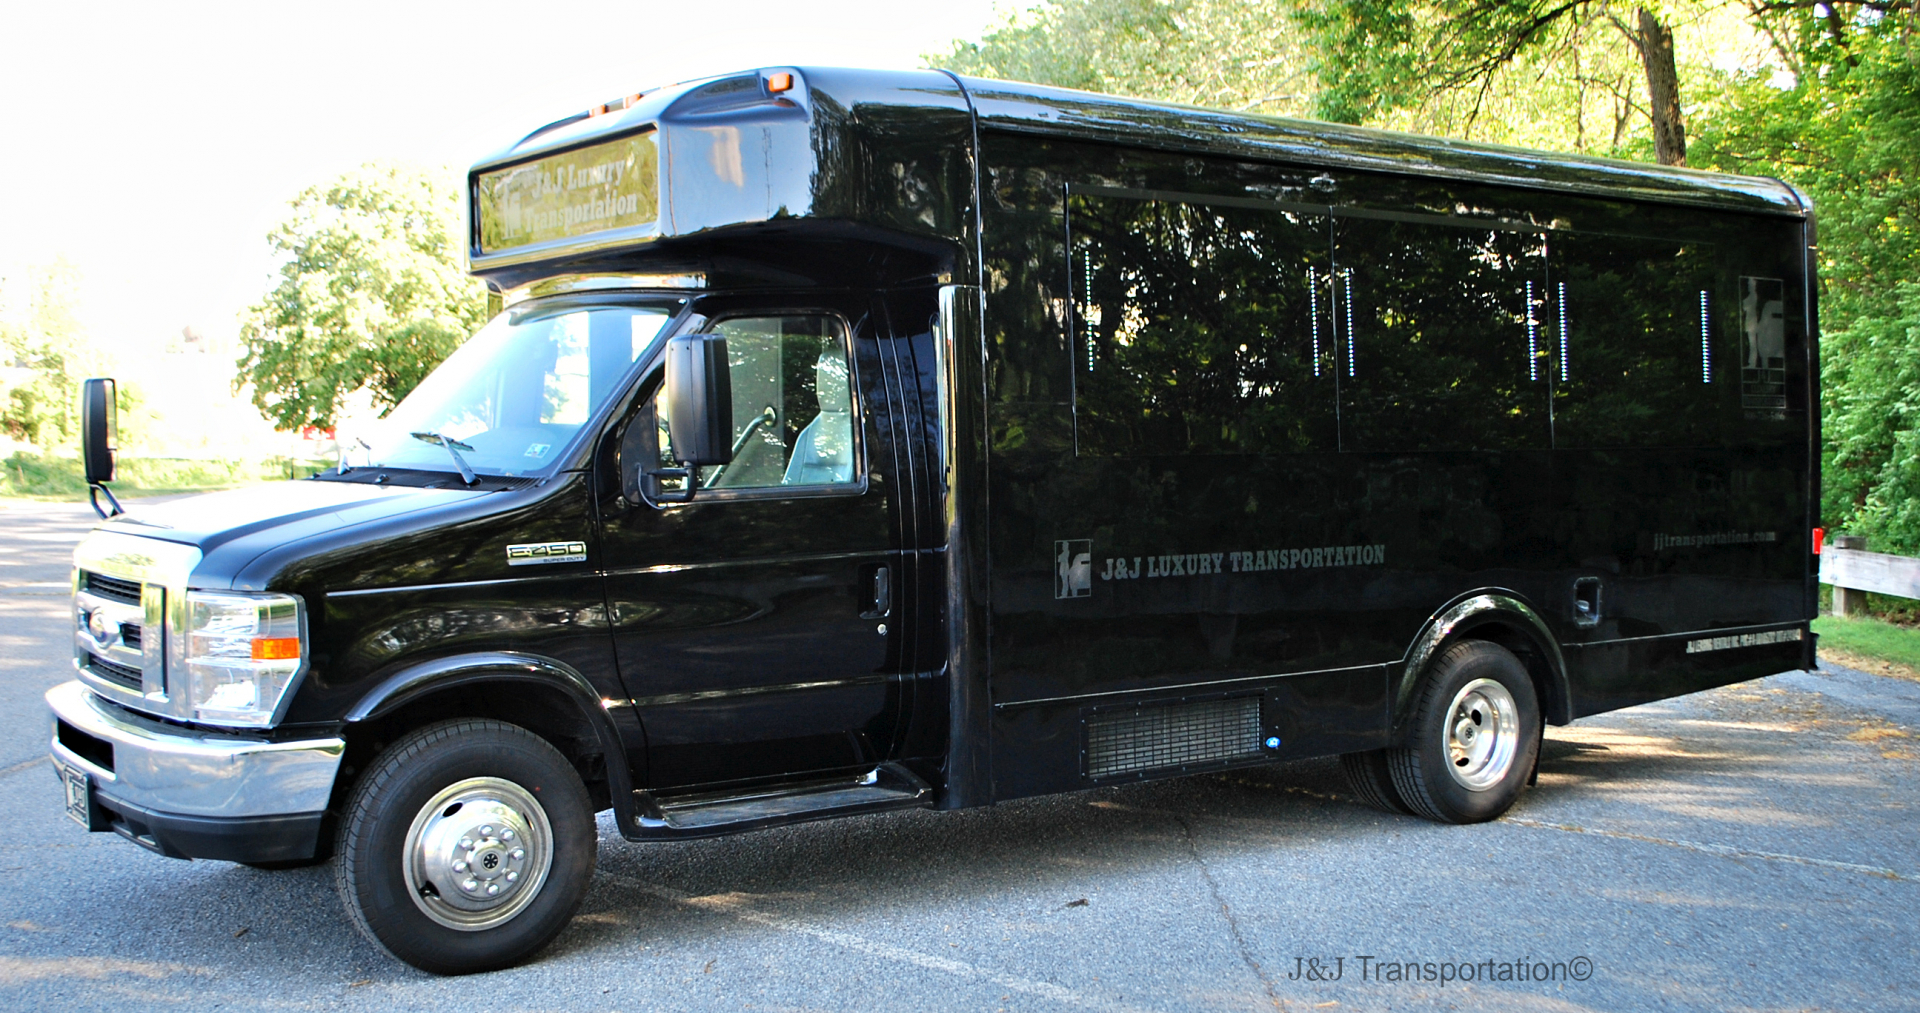 14 Passenger Party Bus
Party Limo Bus /
Allentown, PA

 / Hourly $0.00
